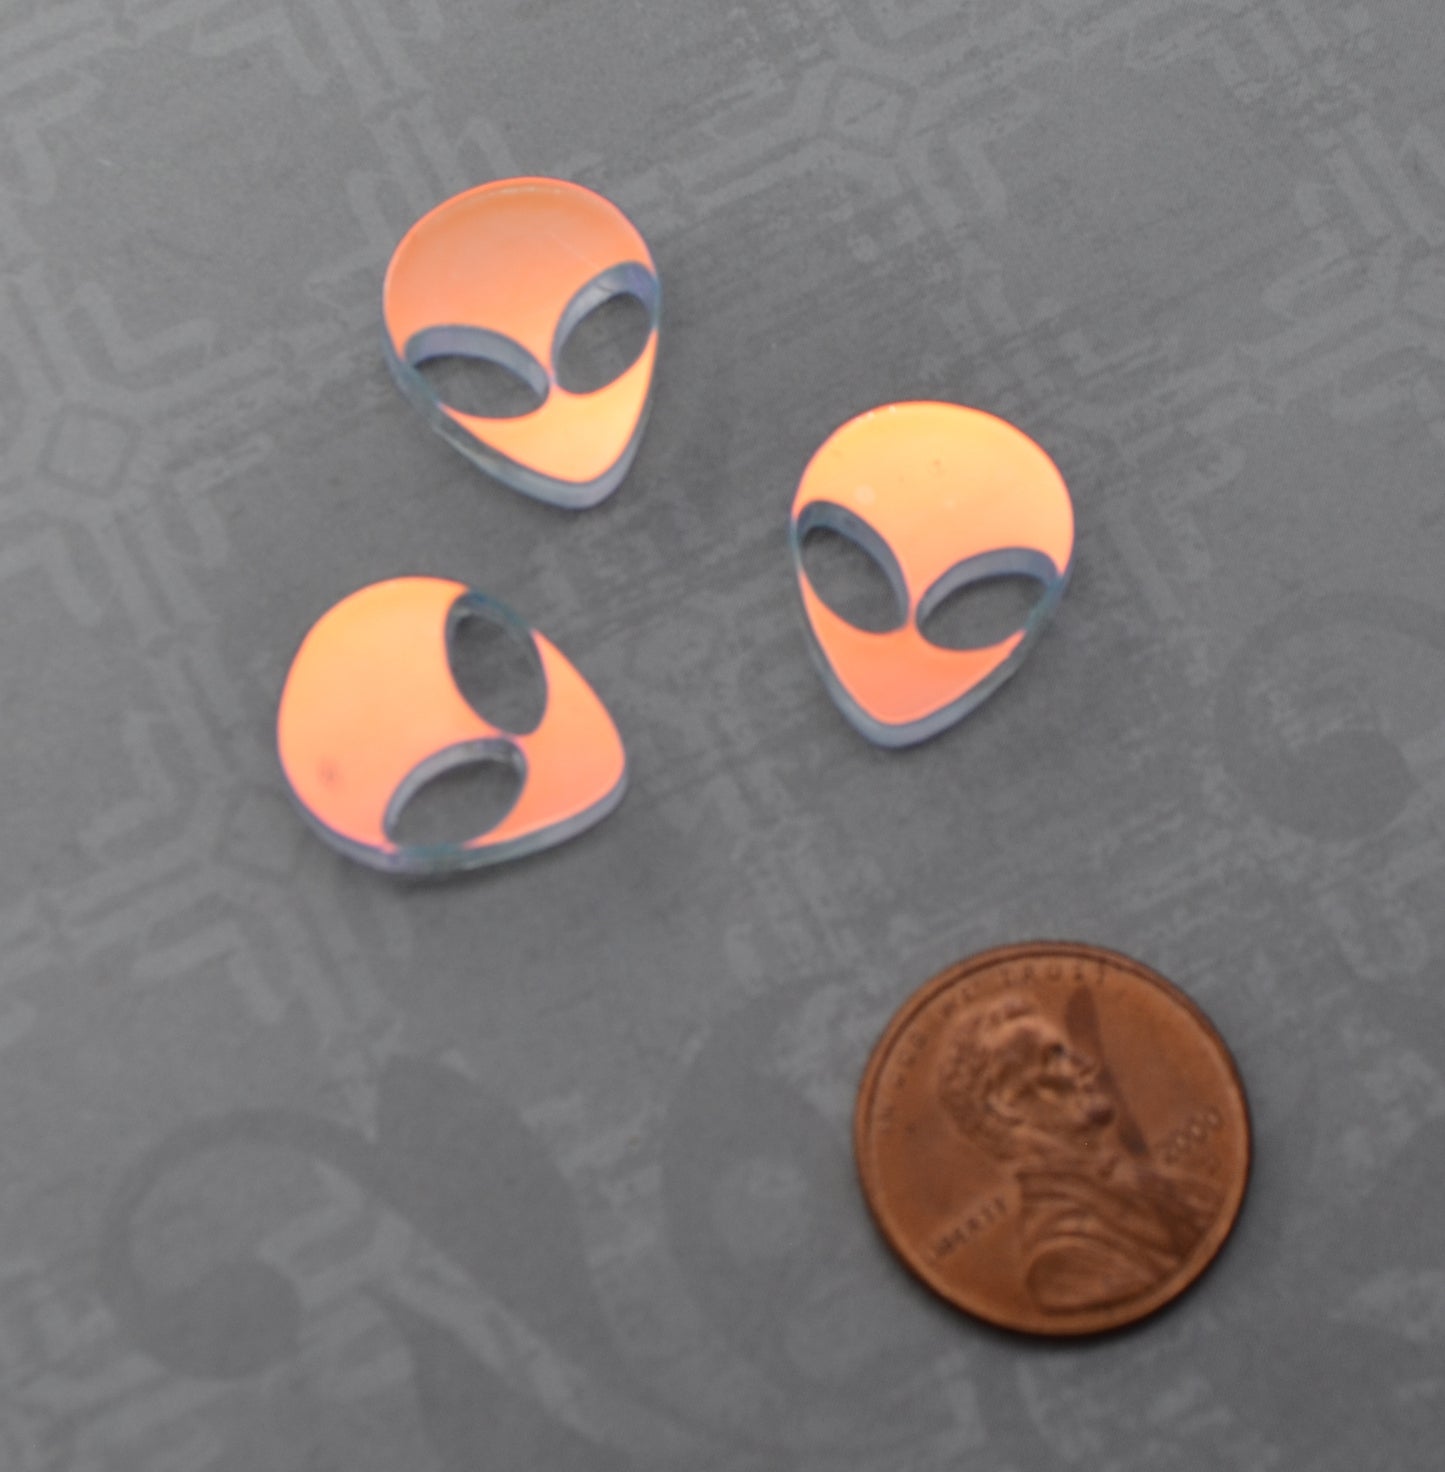 CLEAR IRIDESCENT ALIENS 3 Pieces Flatback Cabochons In Laser Cut Acrylic